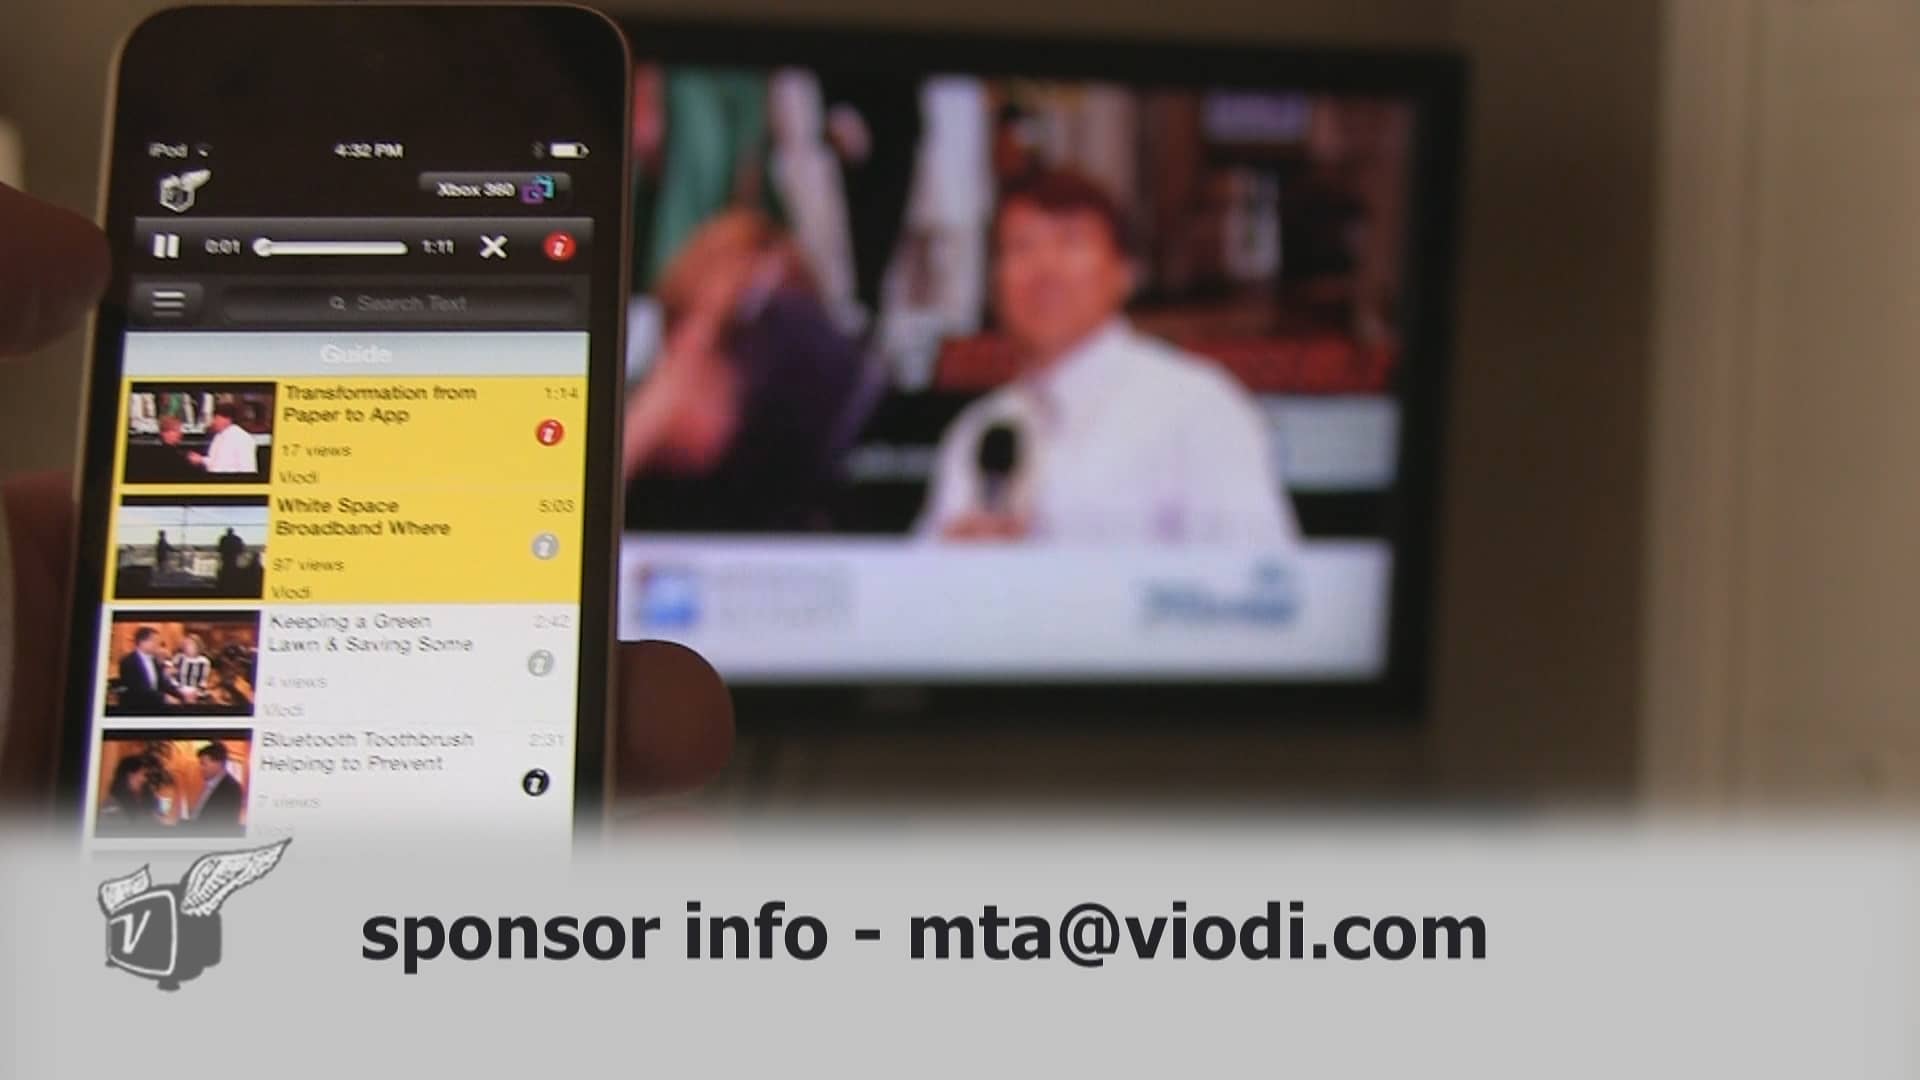 An image depicting the ViodiTV app with the video playing on TV.